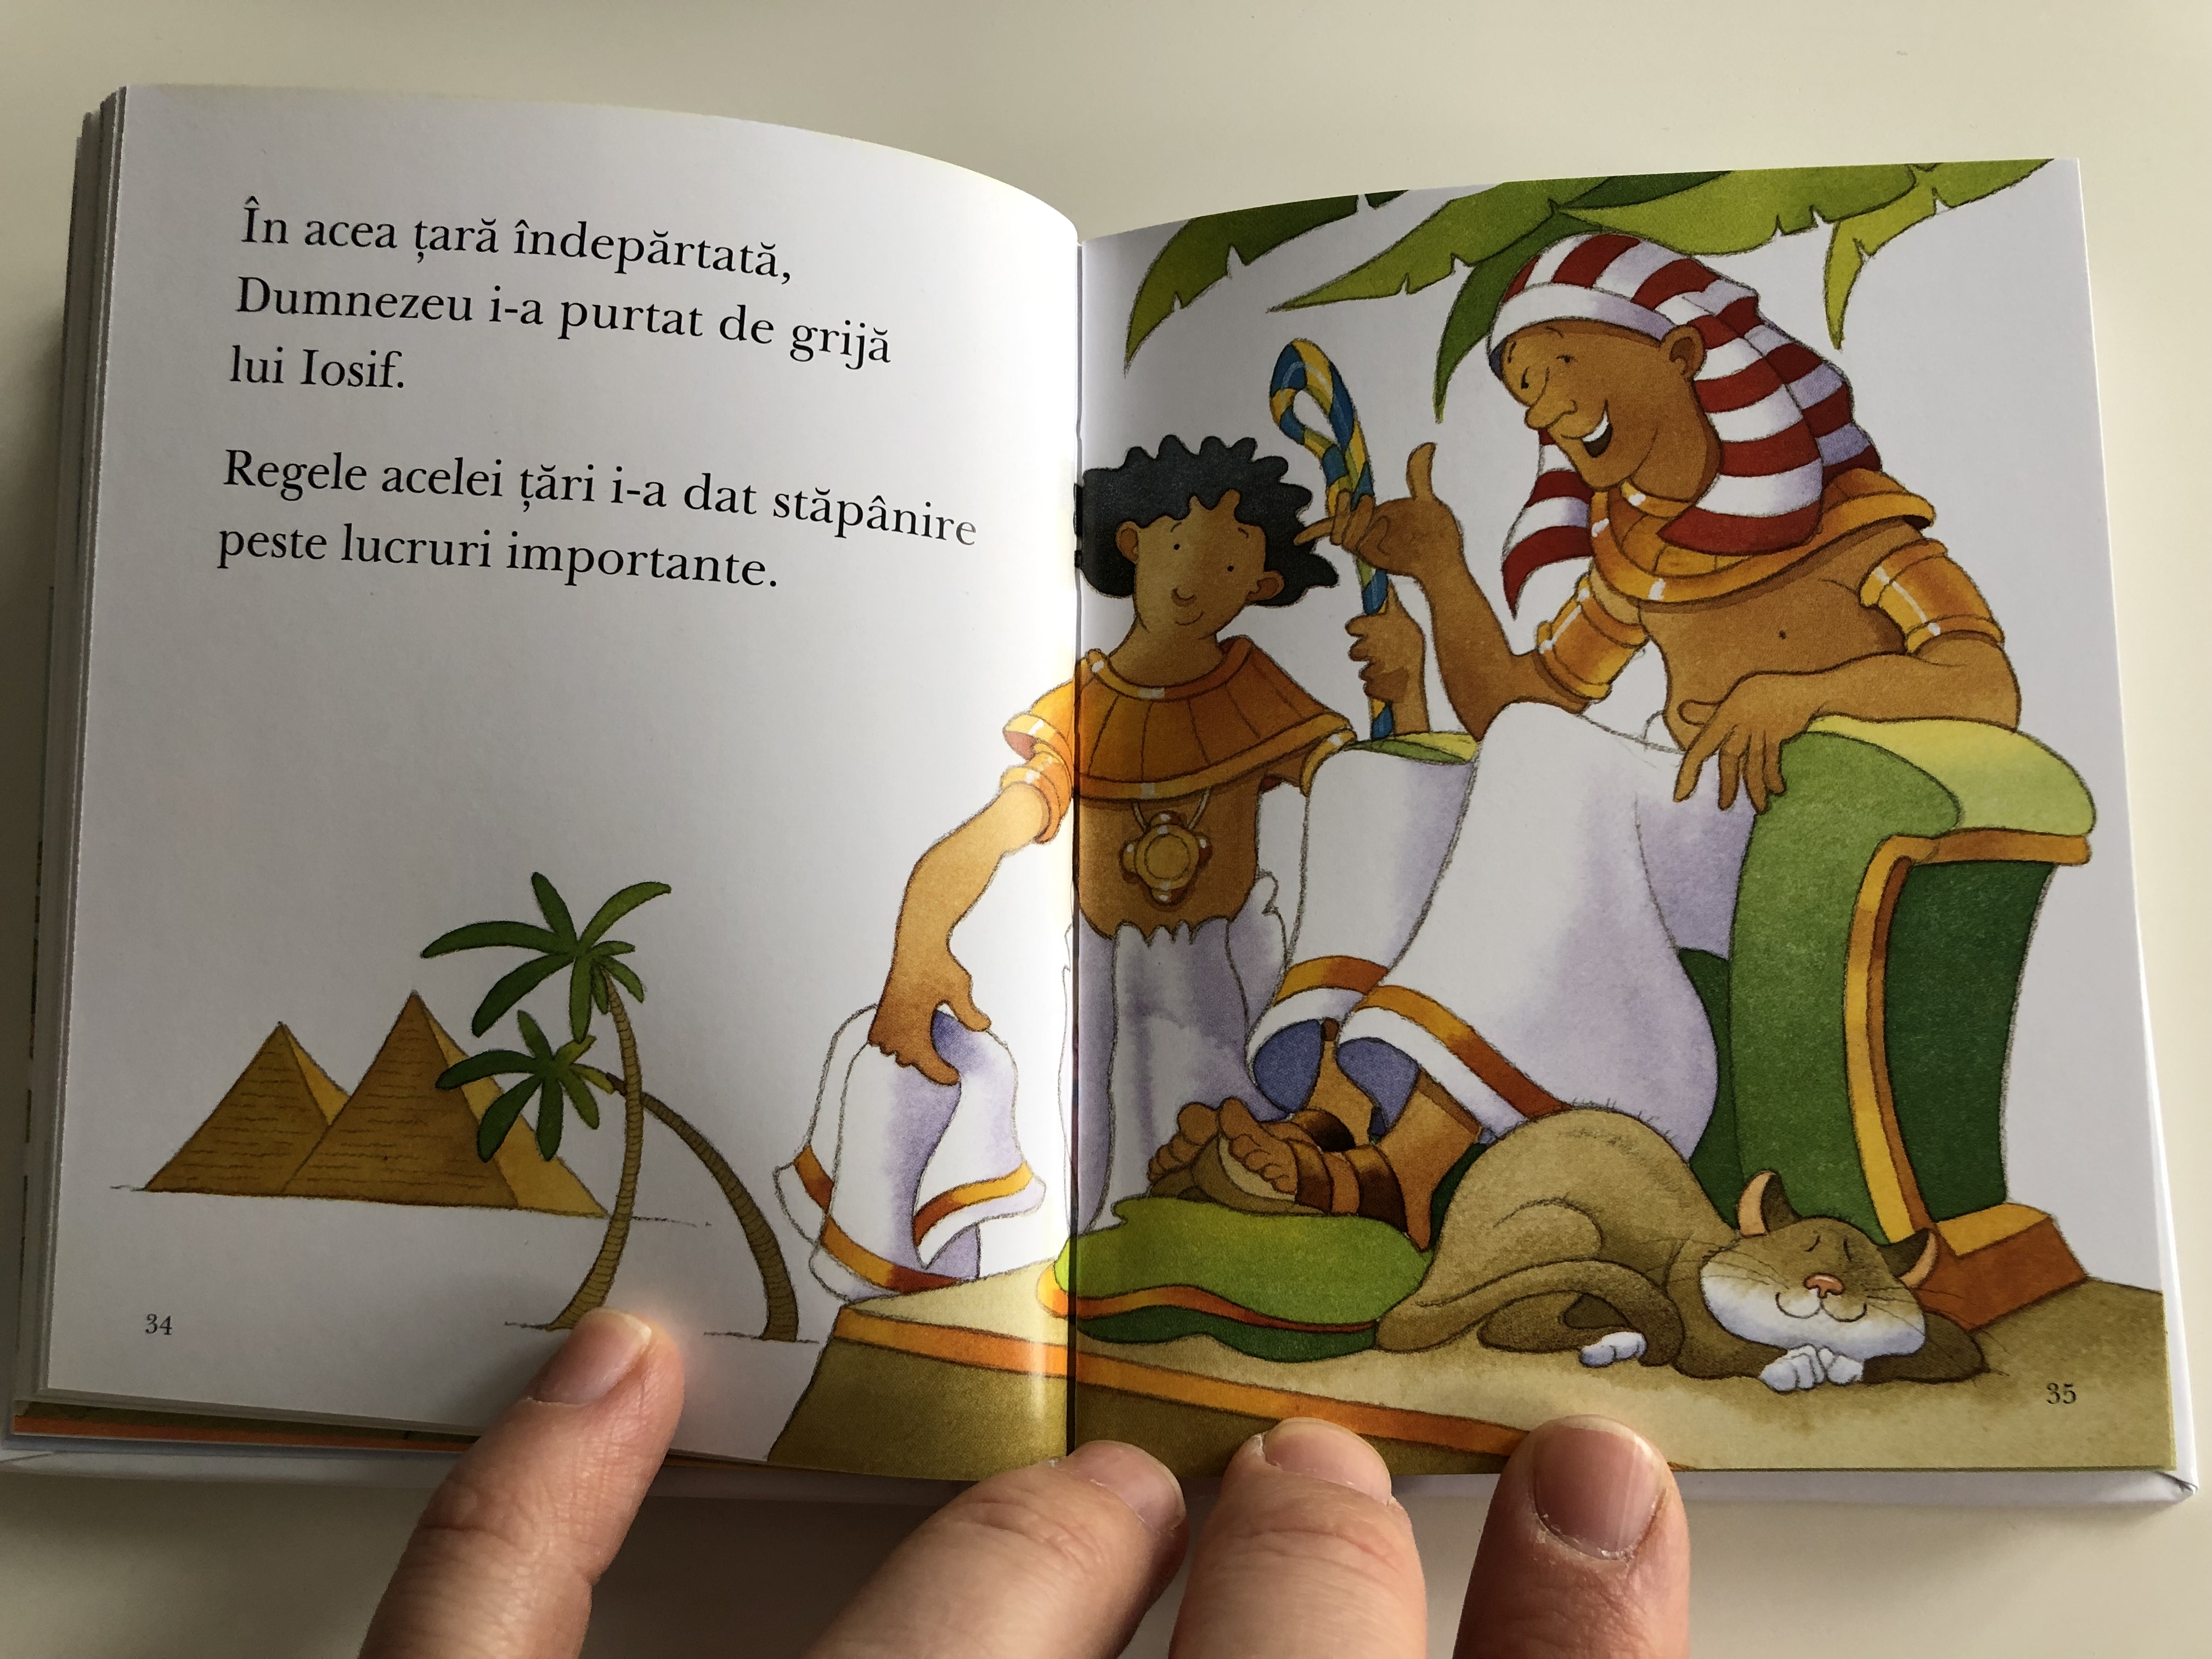 biblia-rug-ciuni-pentru-cei-micuti-by-sarag-toulmin-romanian-translation-of-baby-bible-and-baby-prayers-lion-hudson-comes-in-a-protective-box-baby-bible-for-children-between-1-3-years-illustrations-by-kristina-step-4915245-.jpg